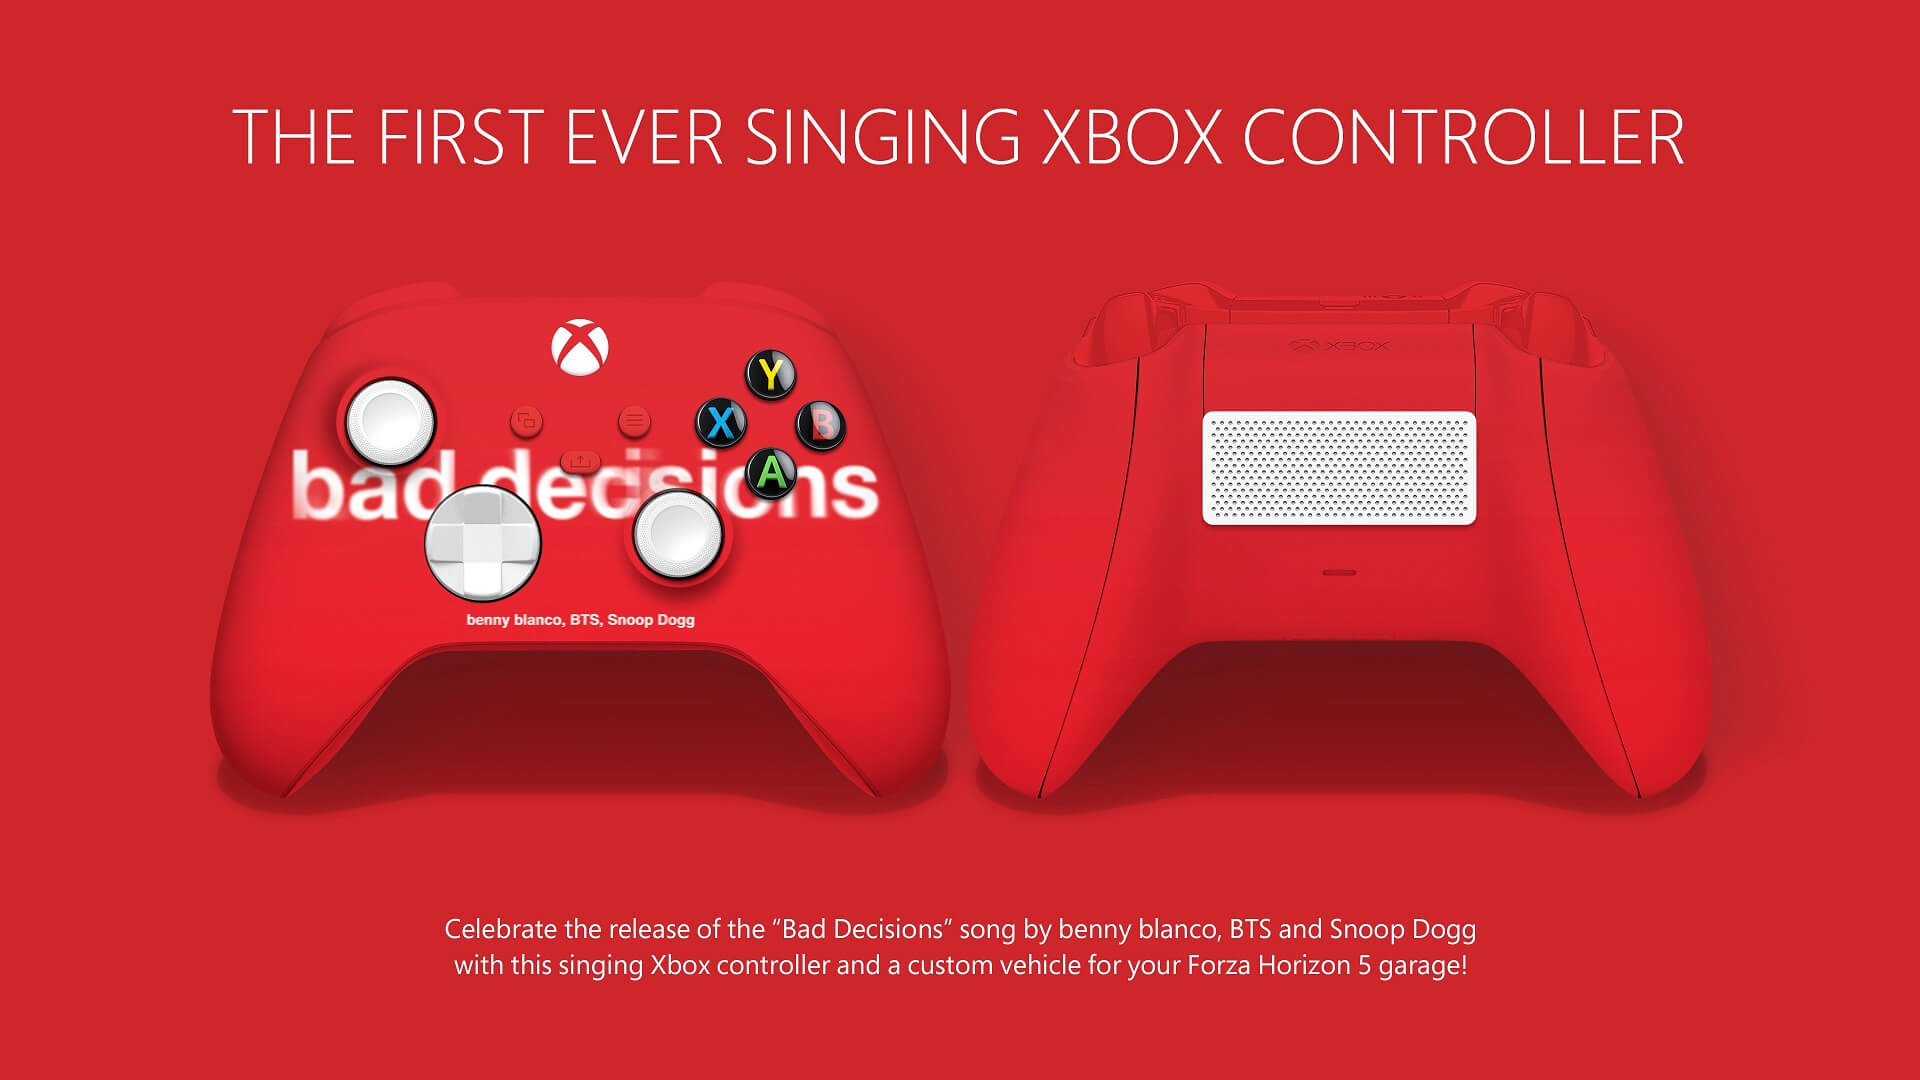 A shot of the new Xbox singing controller